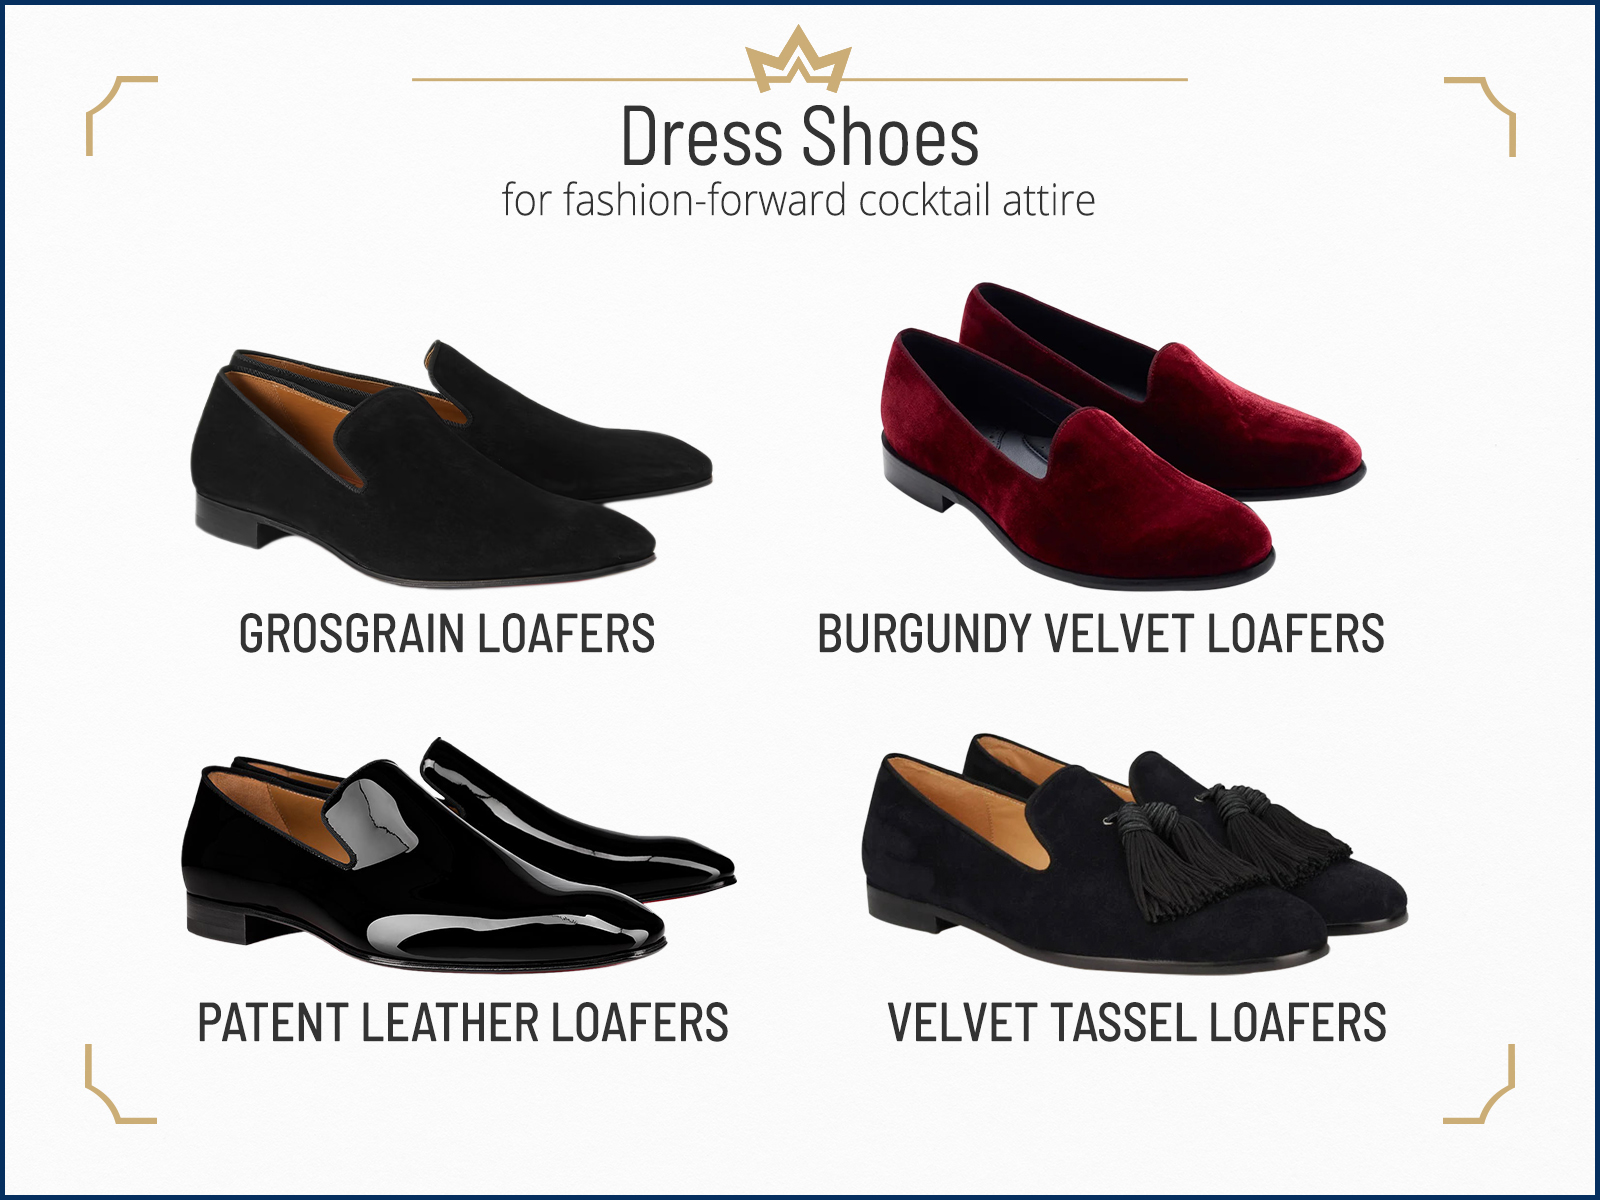 Recommended shoes for fashion-forward outfits